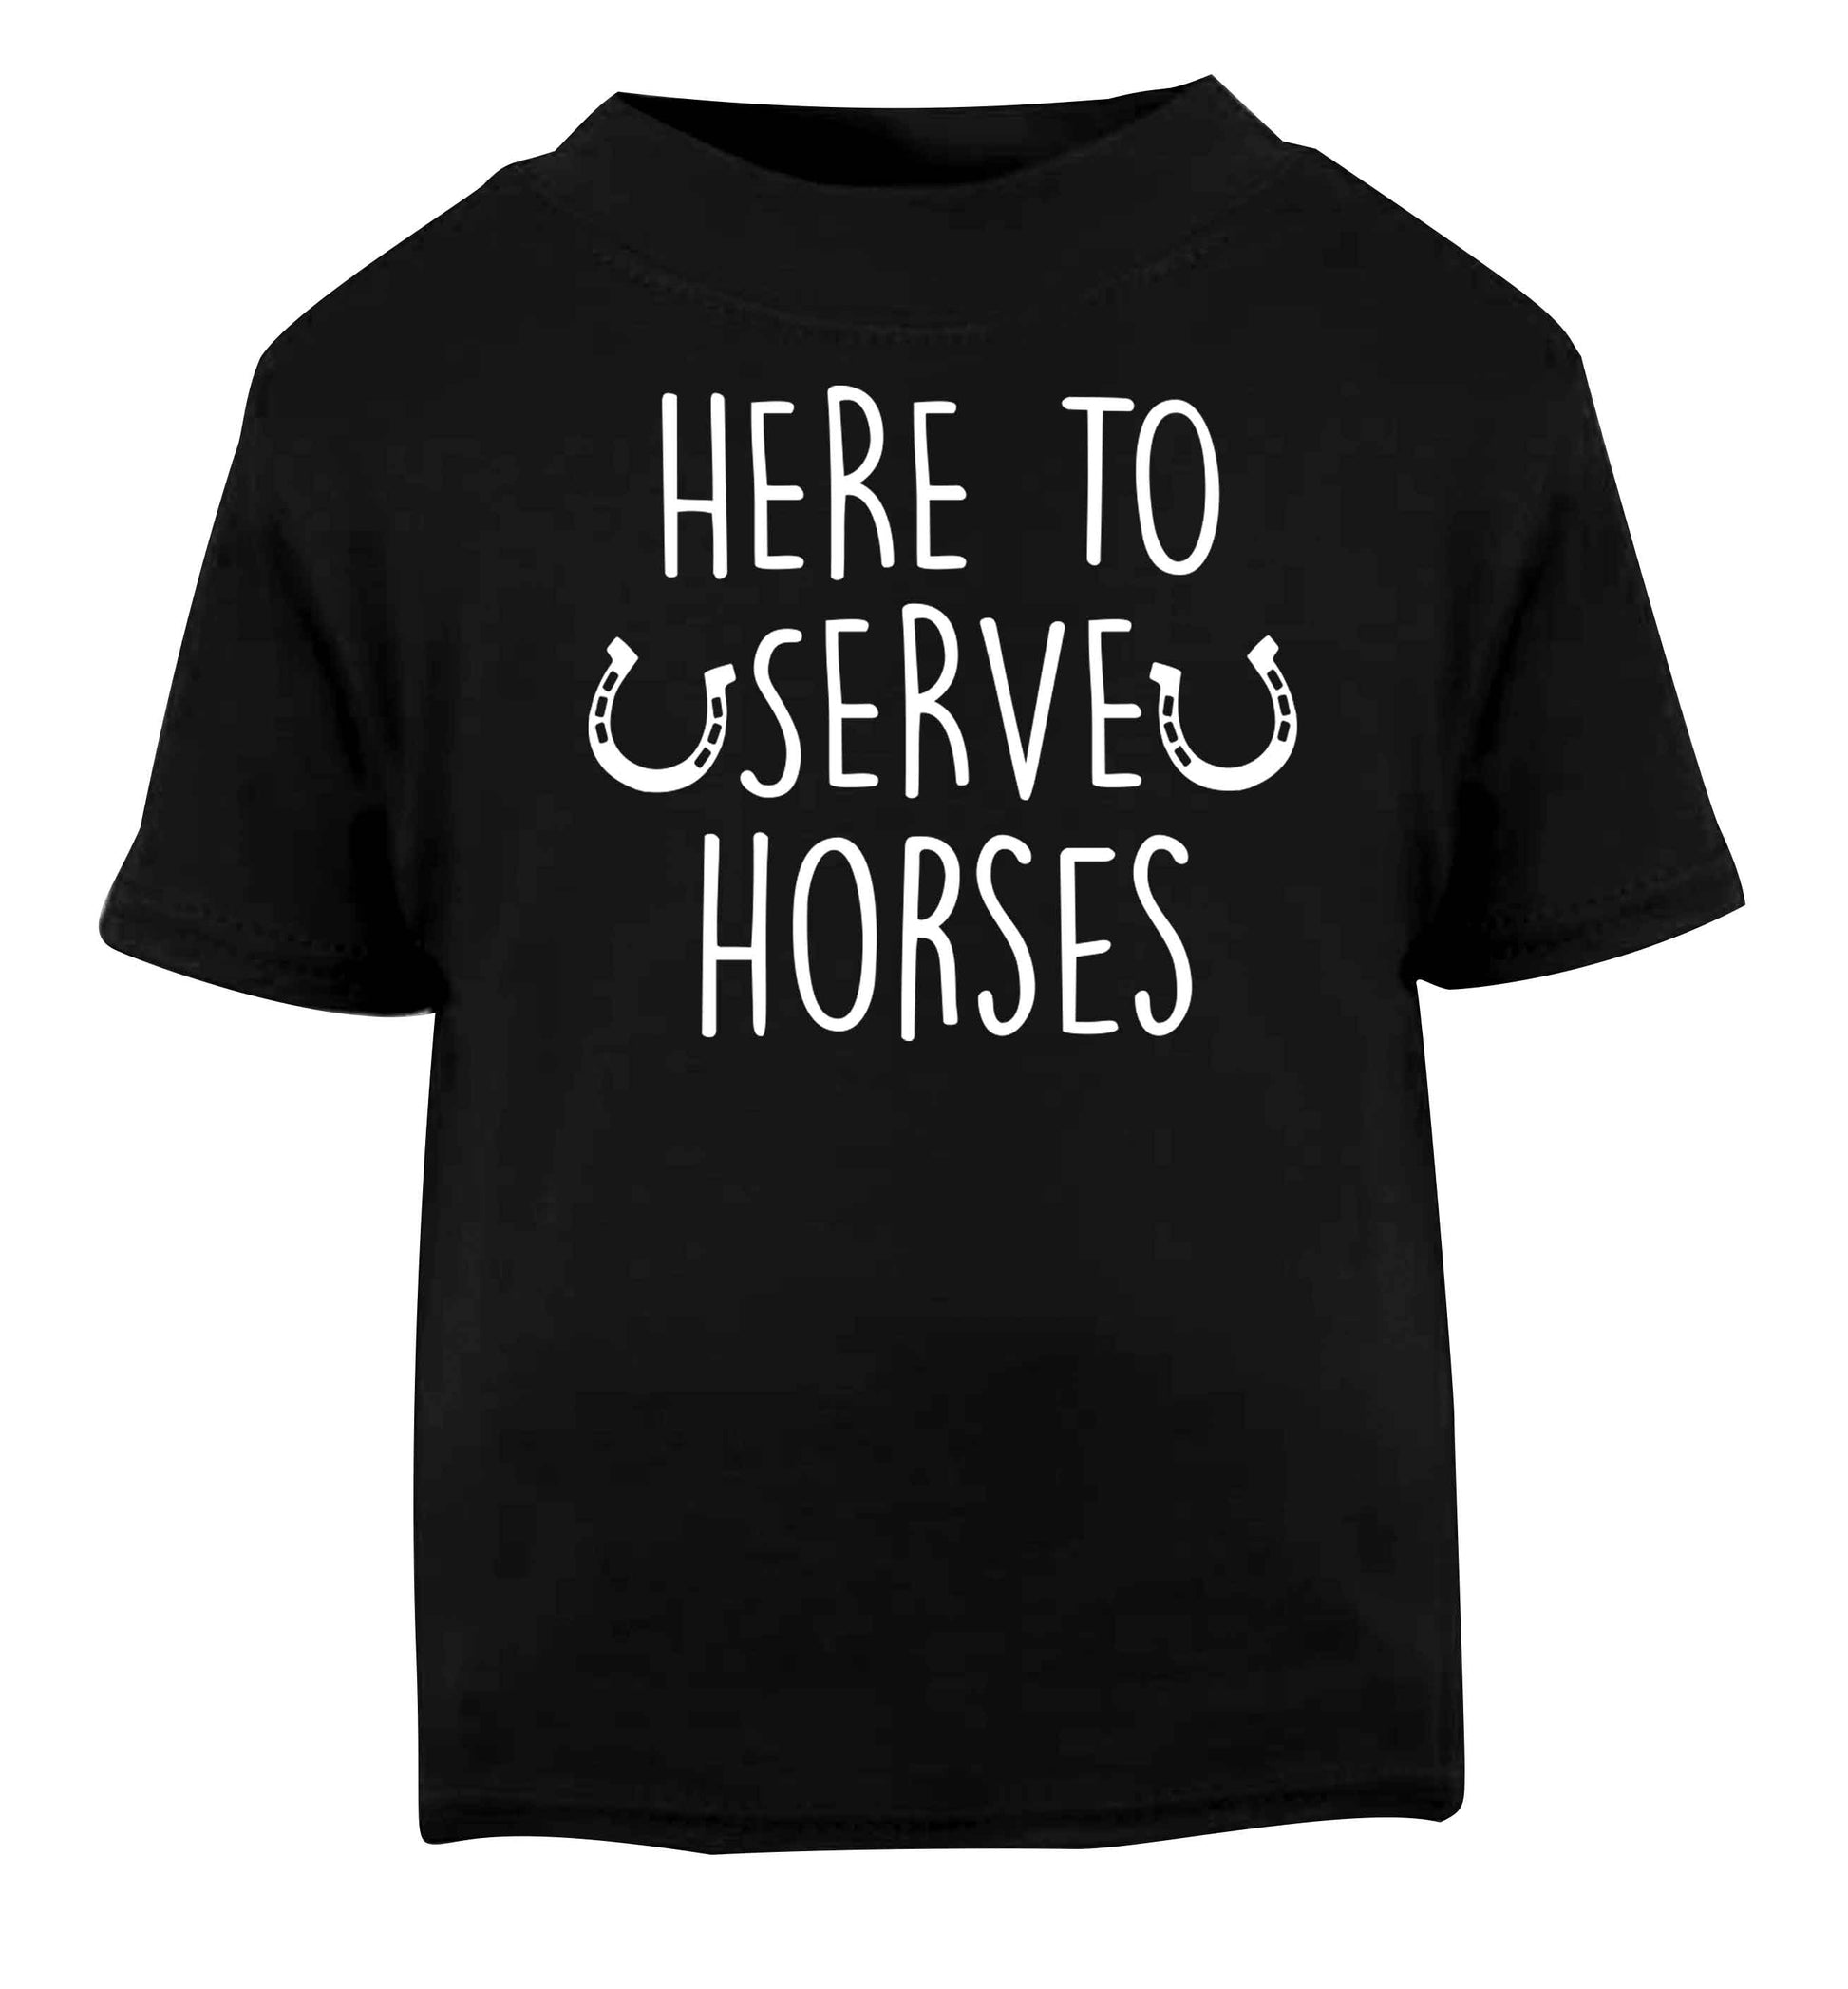 Here to serve horses Black baby toddler Tshirt 2 years